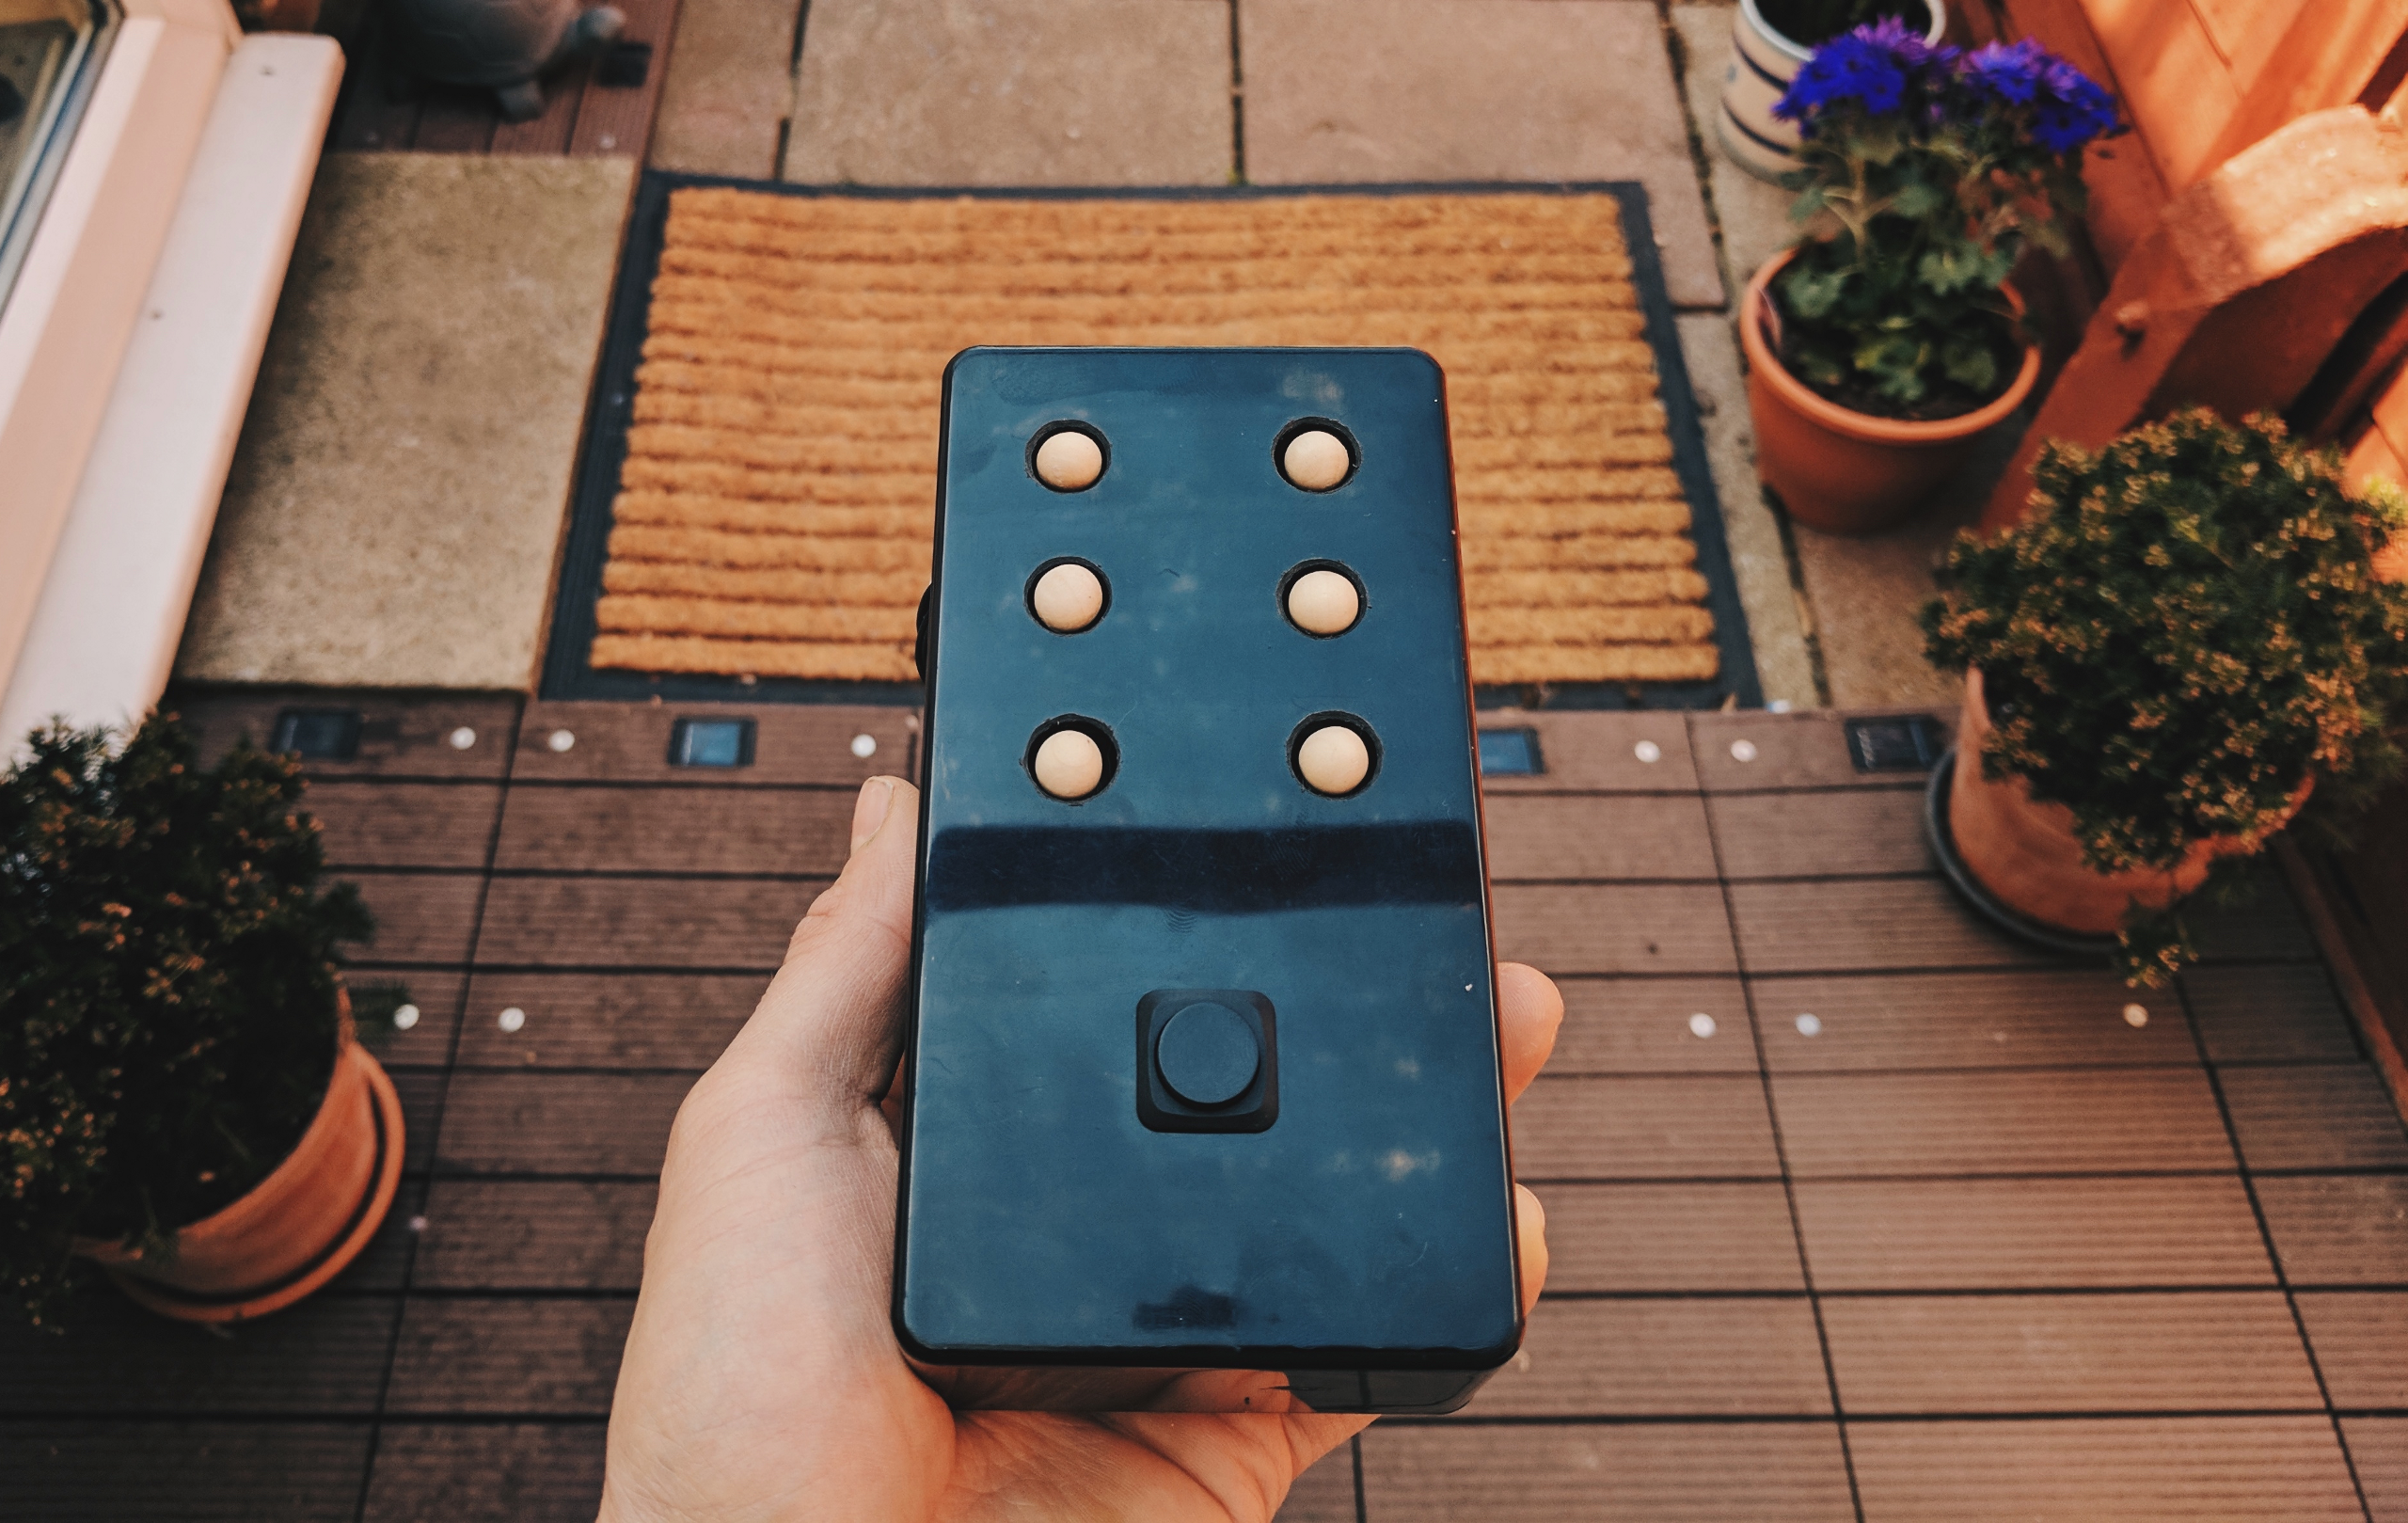 BrailleBox: Building a Braille news reader with Android Things